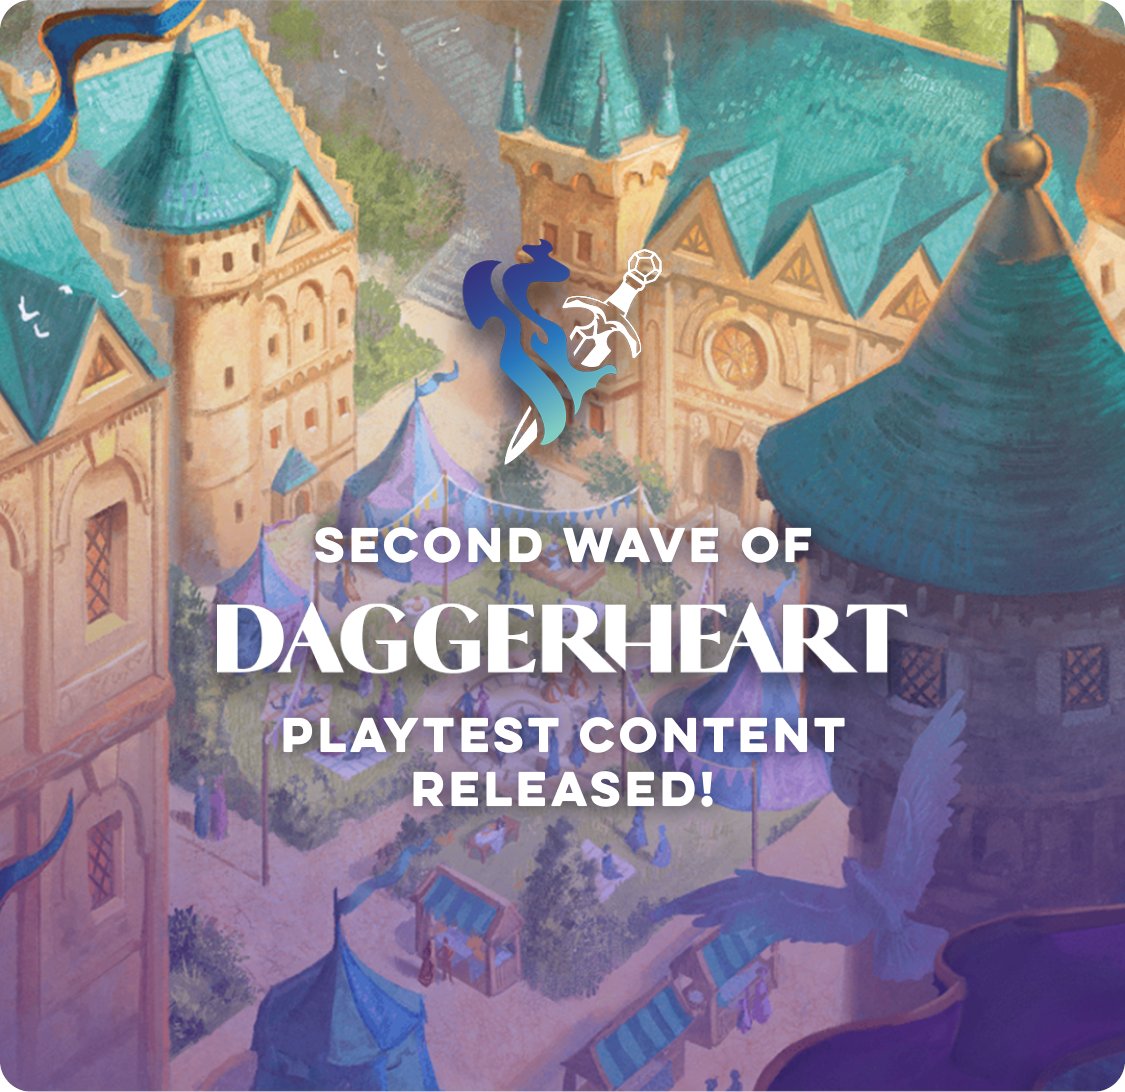 Attention adventurers! The Daggerheart Playtest 1.3 Update is now available! Explore the changes, create characters, and prepare to provide fresh feedback on DaggerheartNEXUS.com 🗡️ 💙